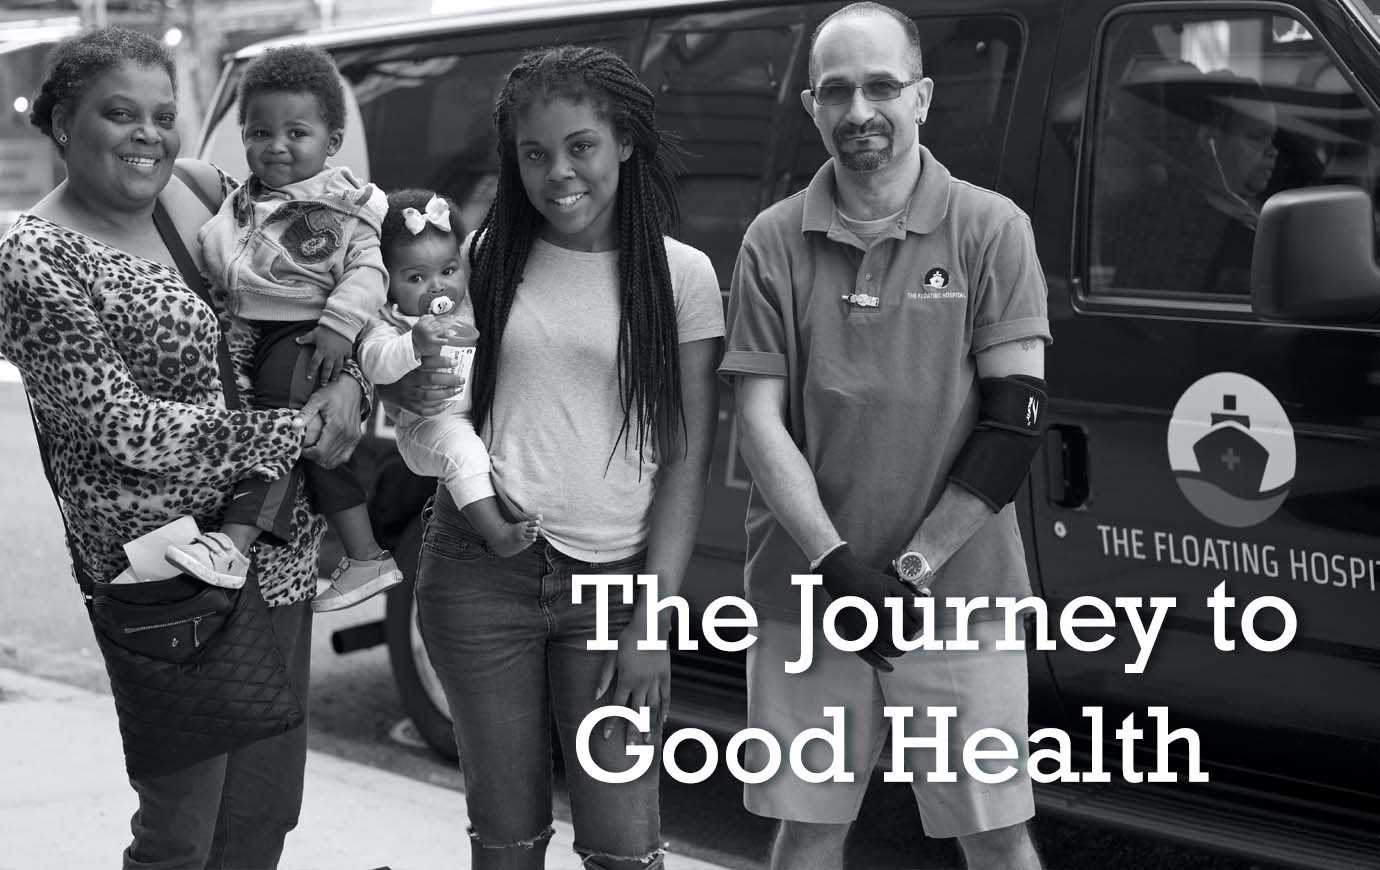 The Floating Hospital's Good Health Shuttle: The journey to good health